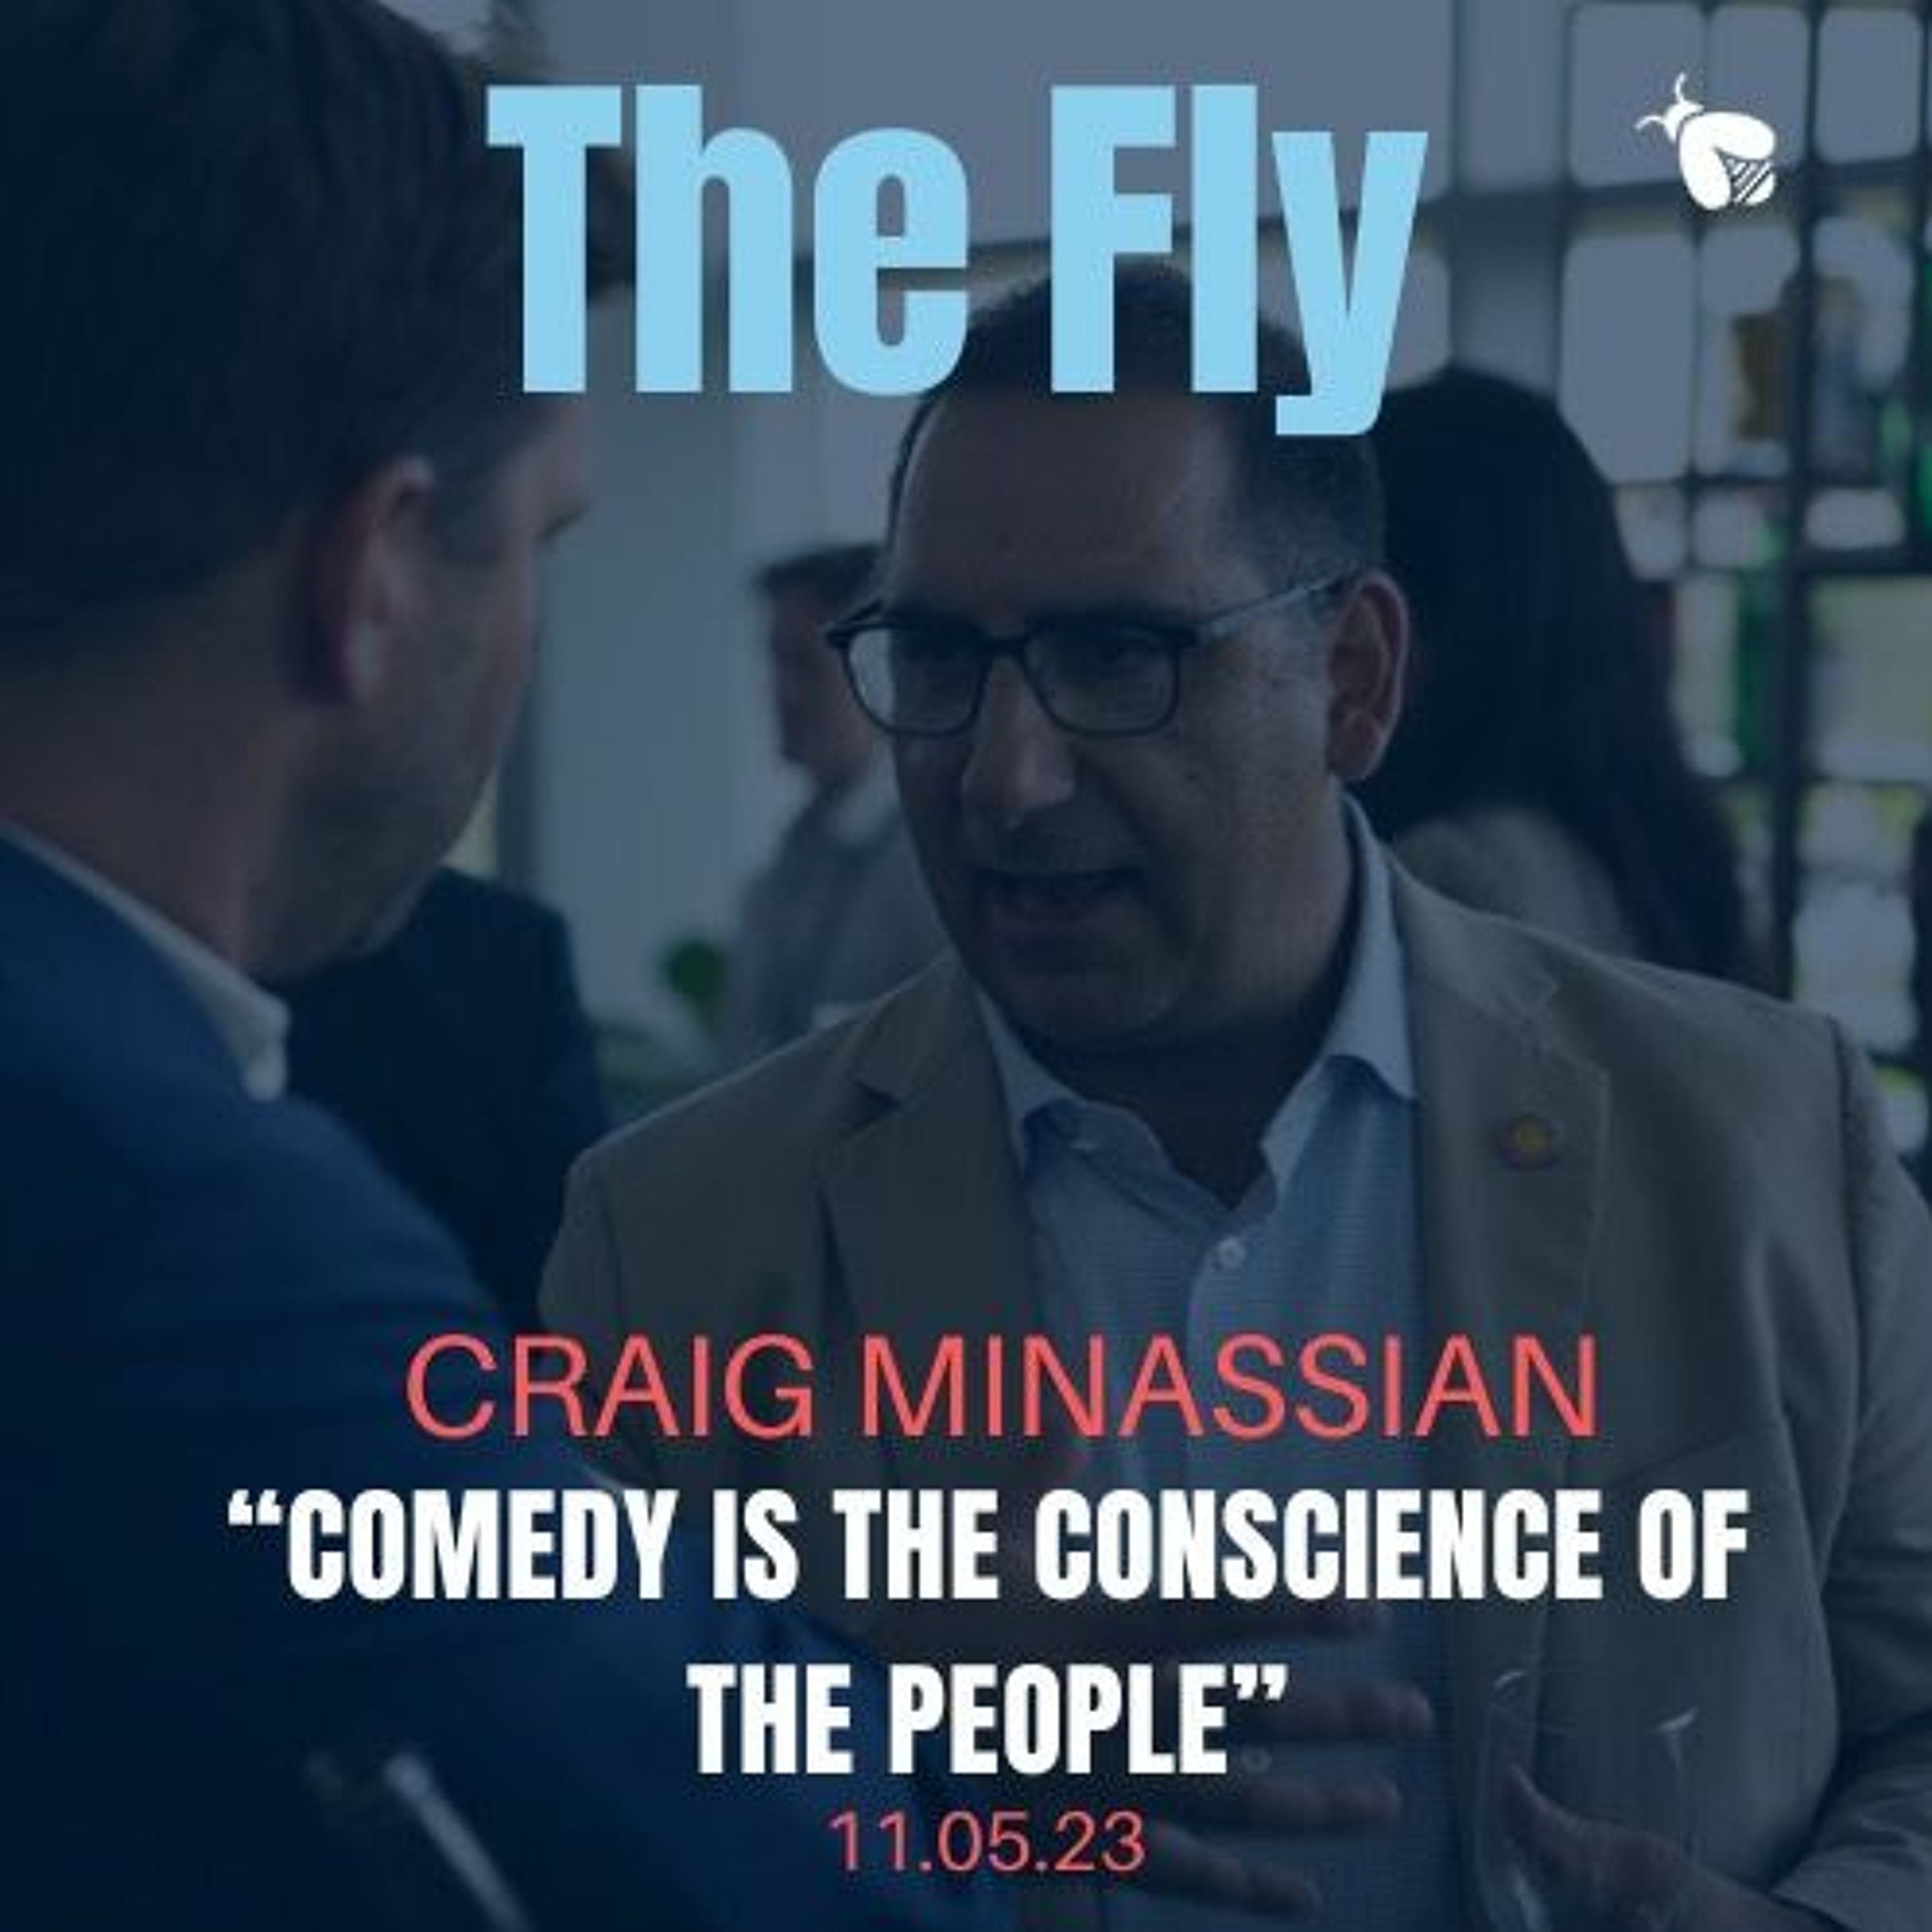 Craig Minassian, Consultant of The Daily Show: “Comedy is the conscience of the people”